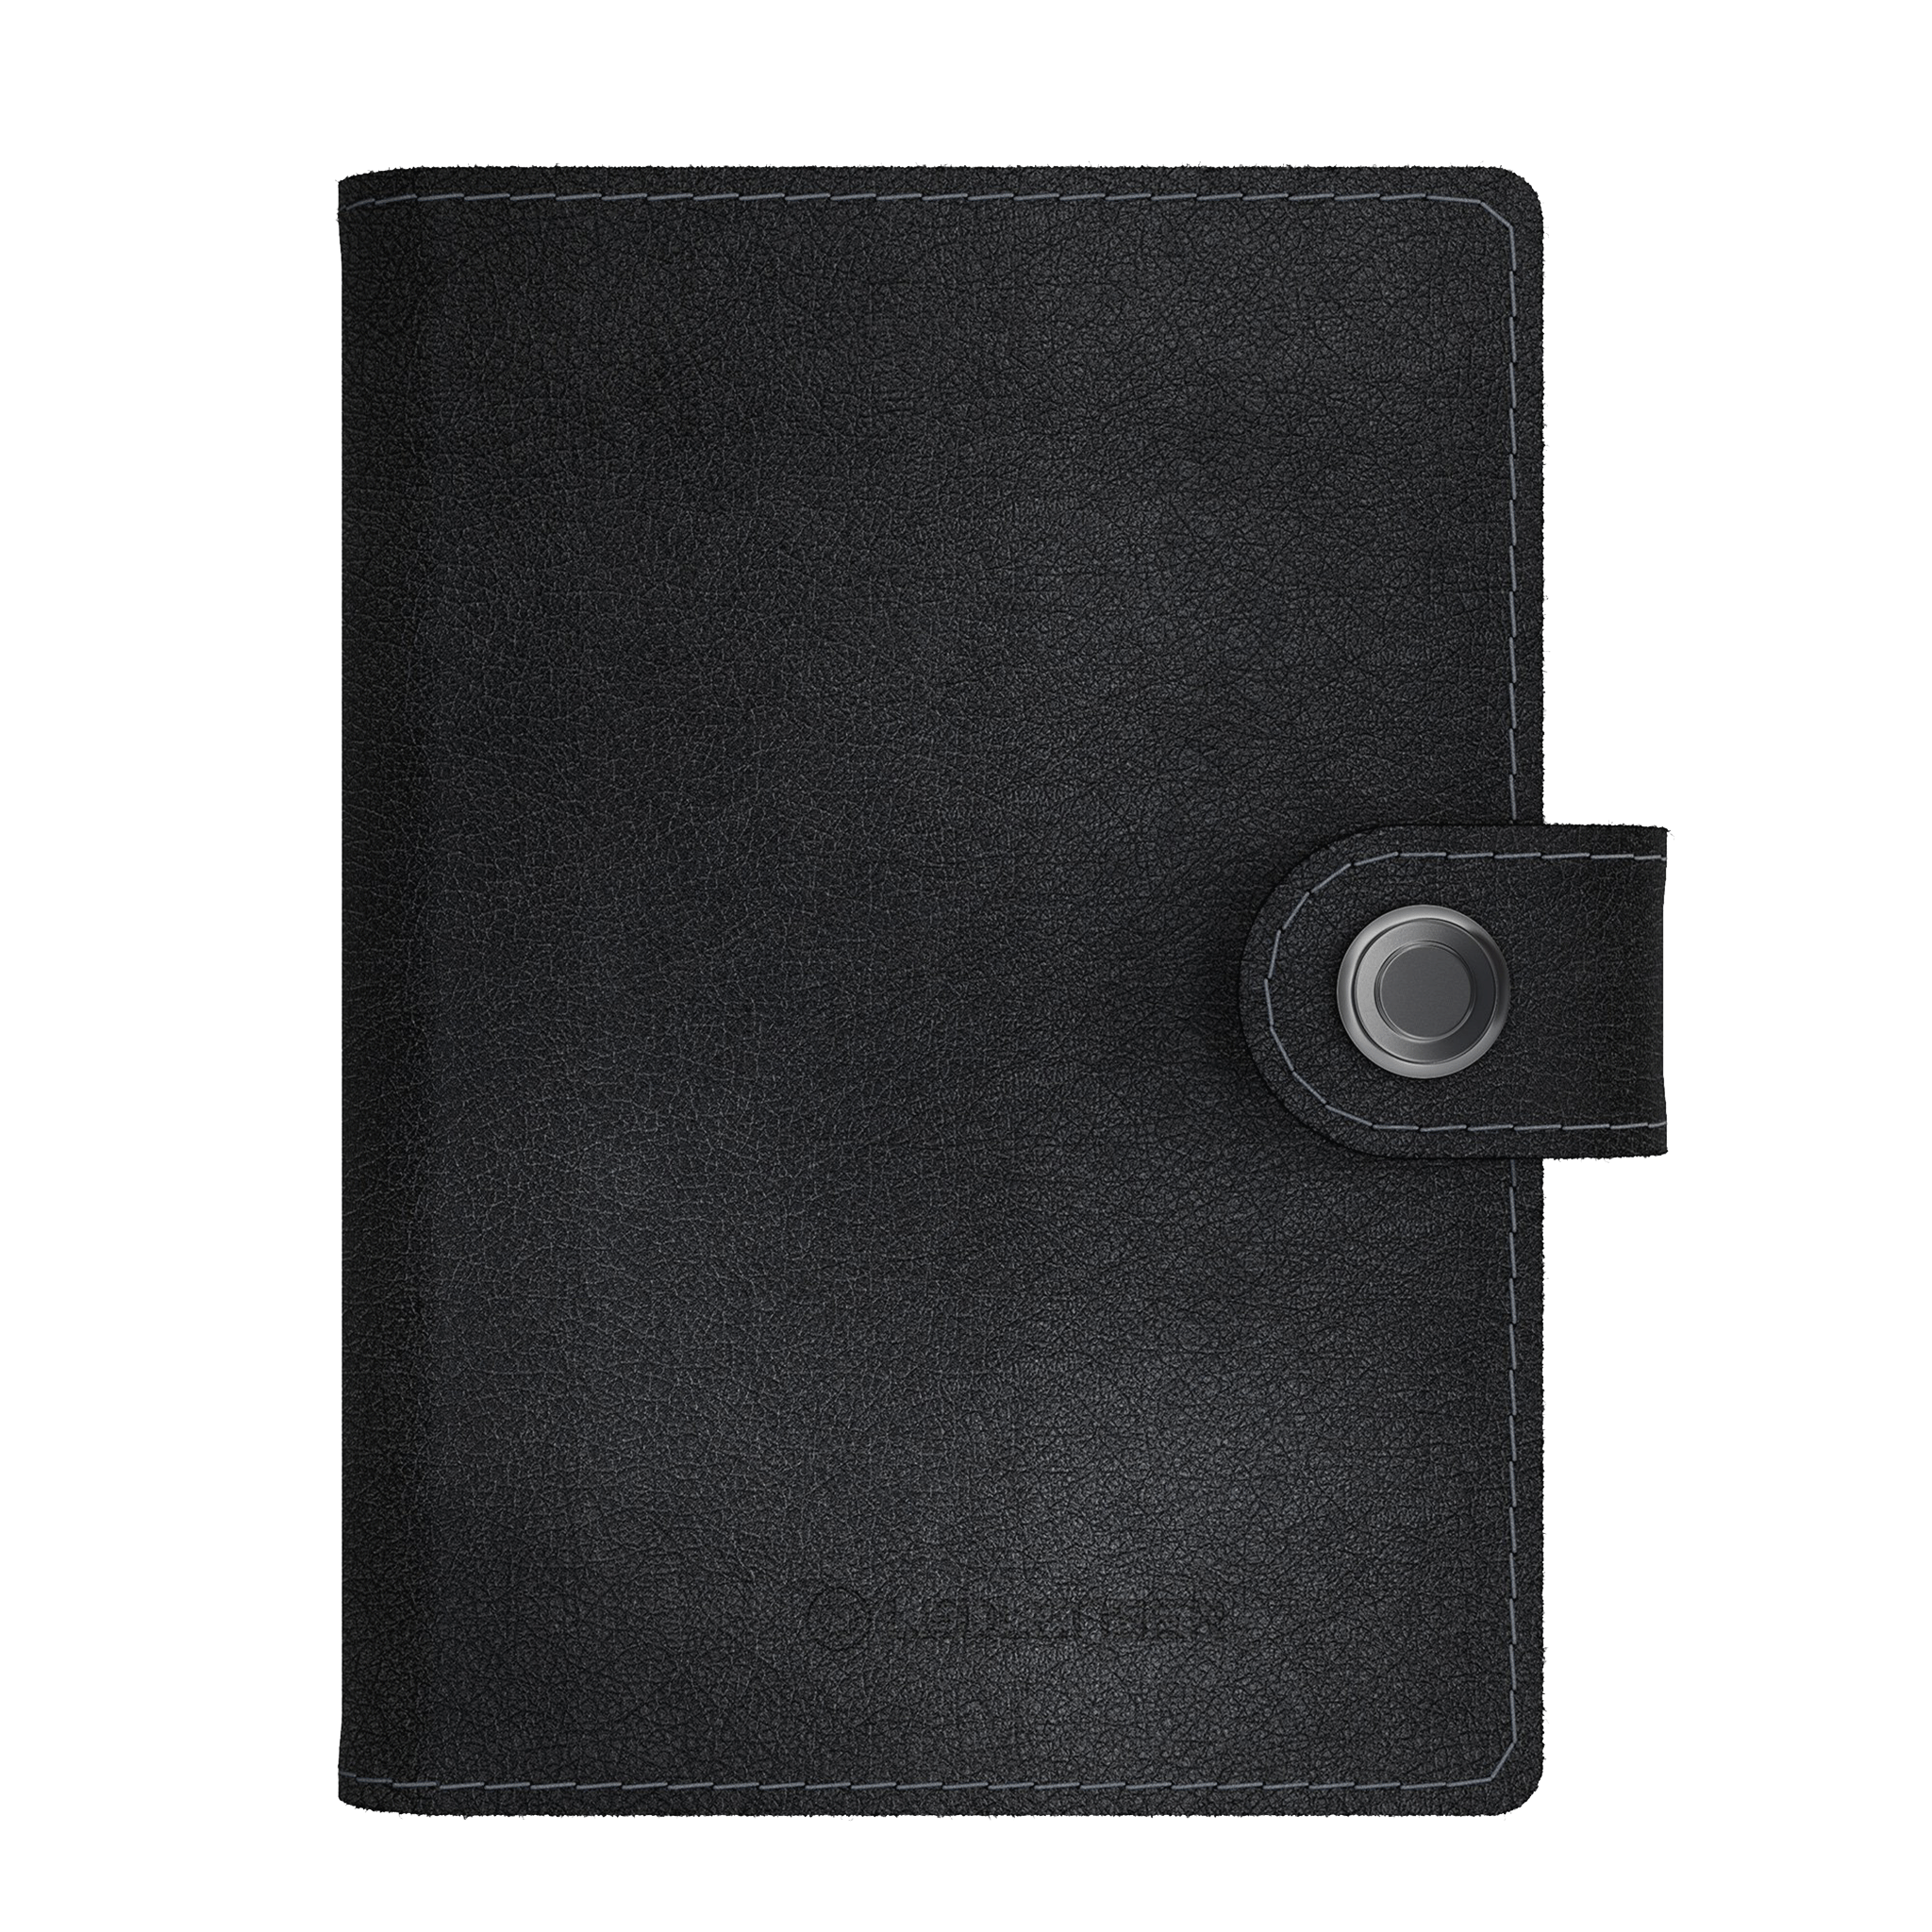 products-from-shopify_0005_LiteWallet-Blk.png